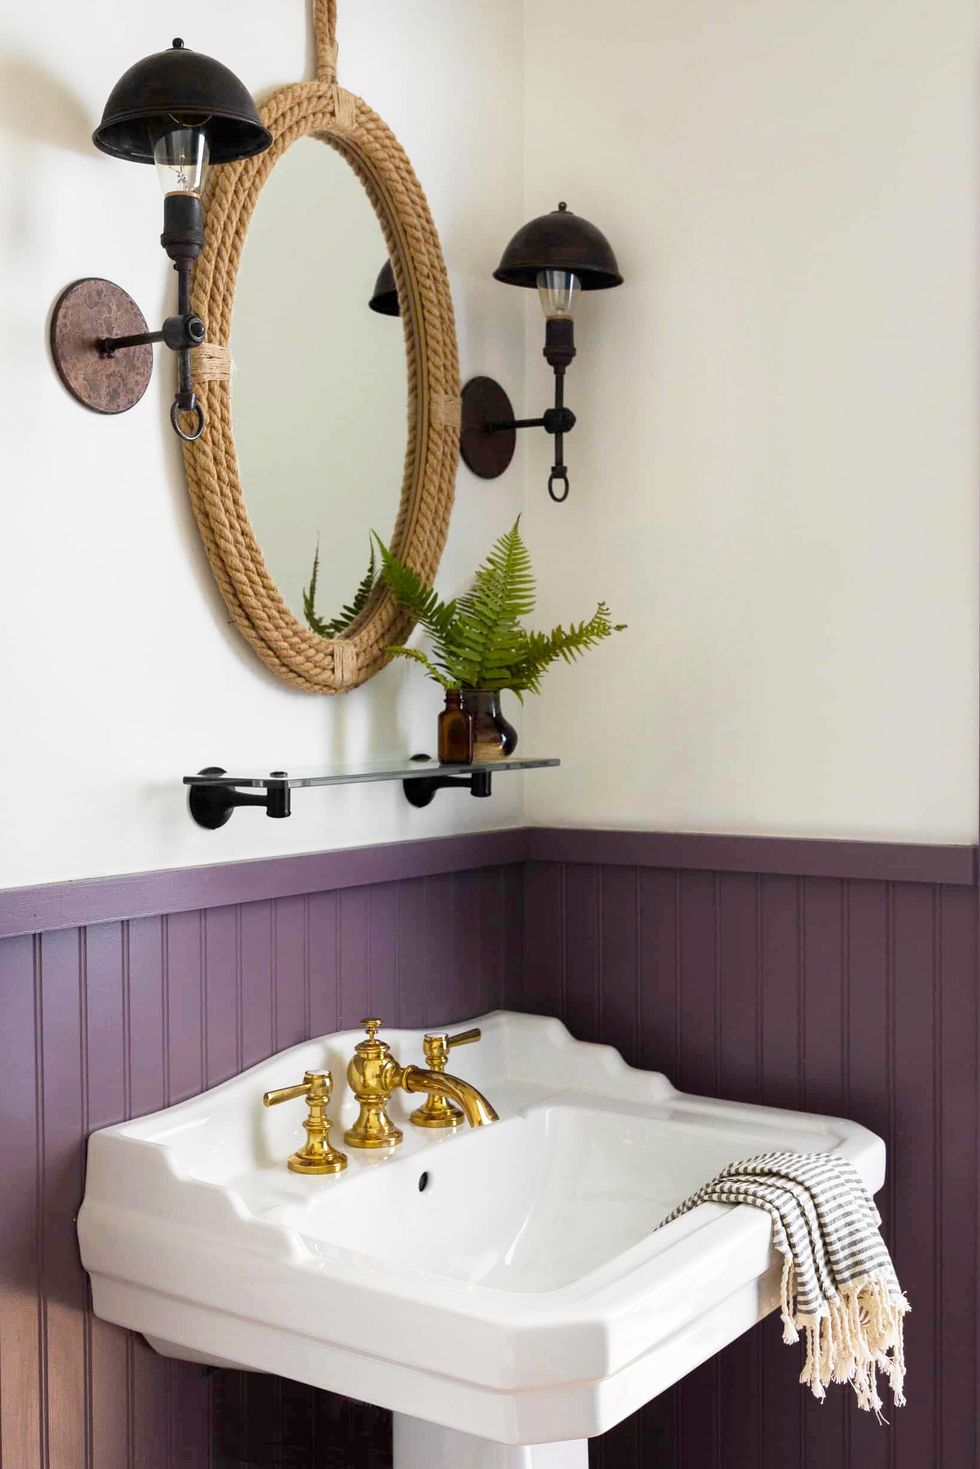 The best paint colors for small bathrooms 